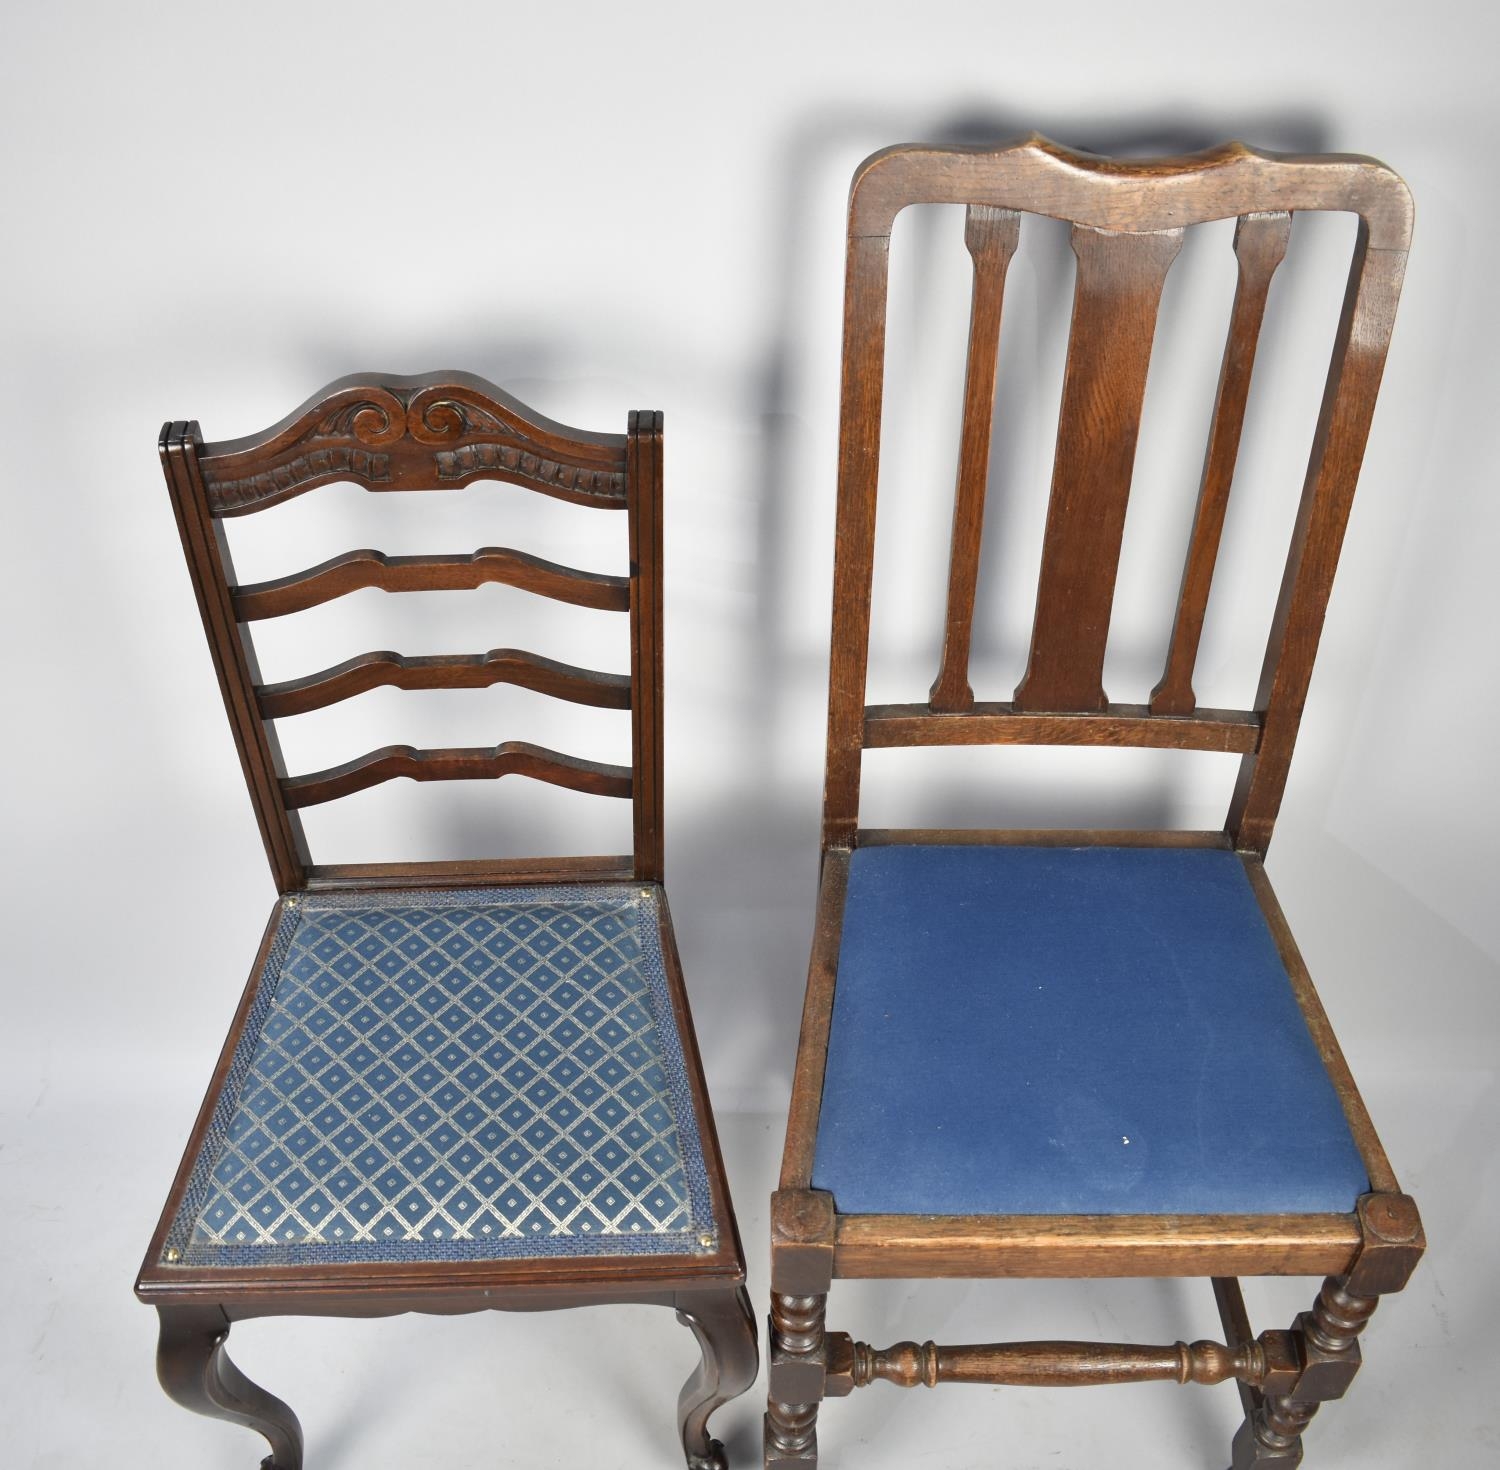 Two Oak Framed Chairs - Image 2 of 2